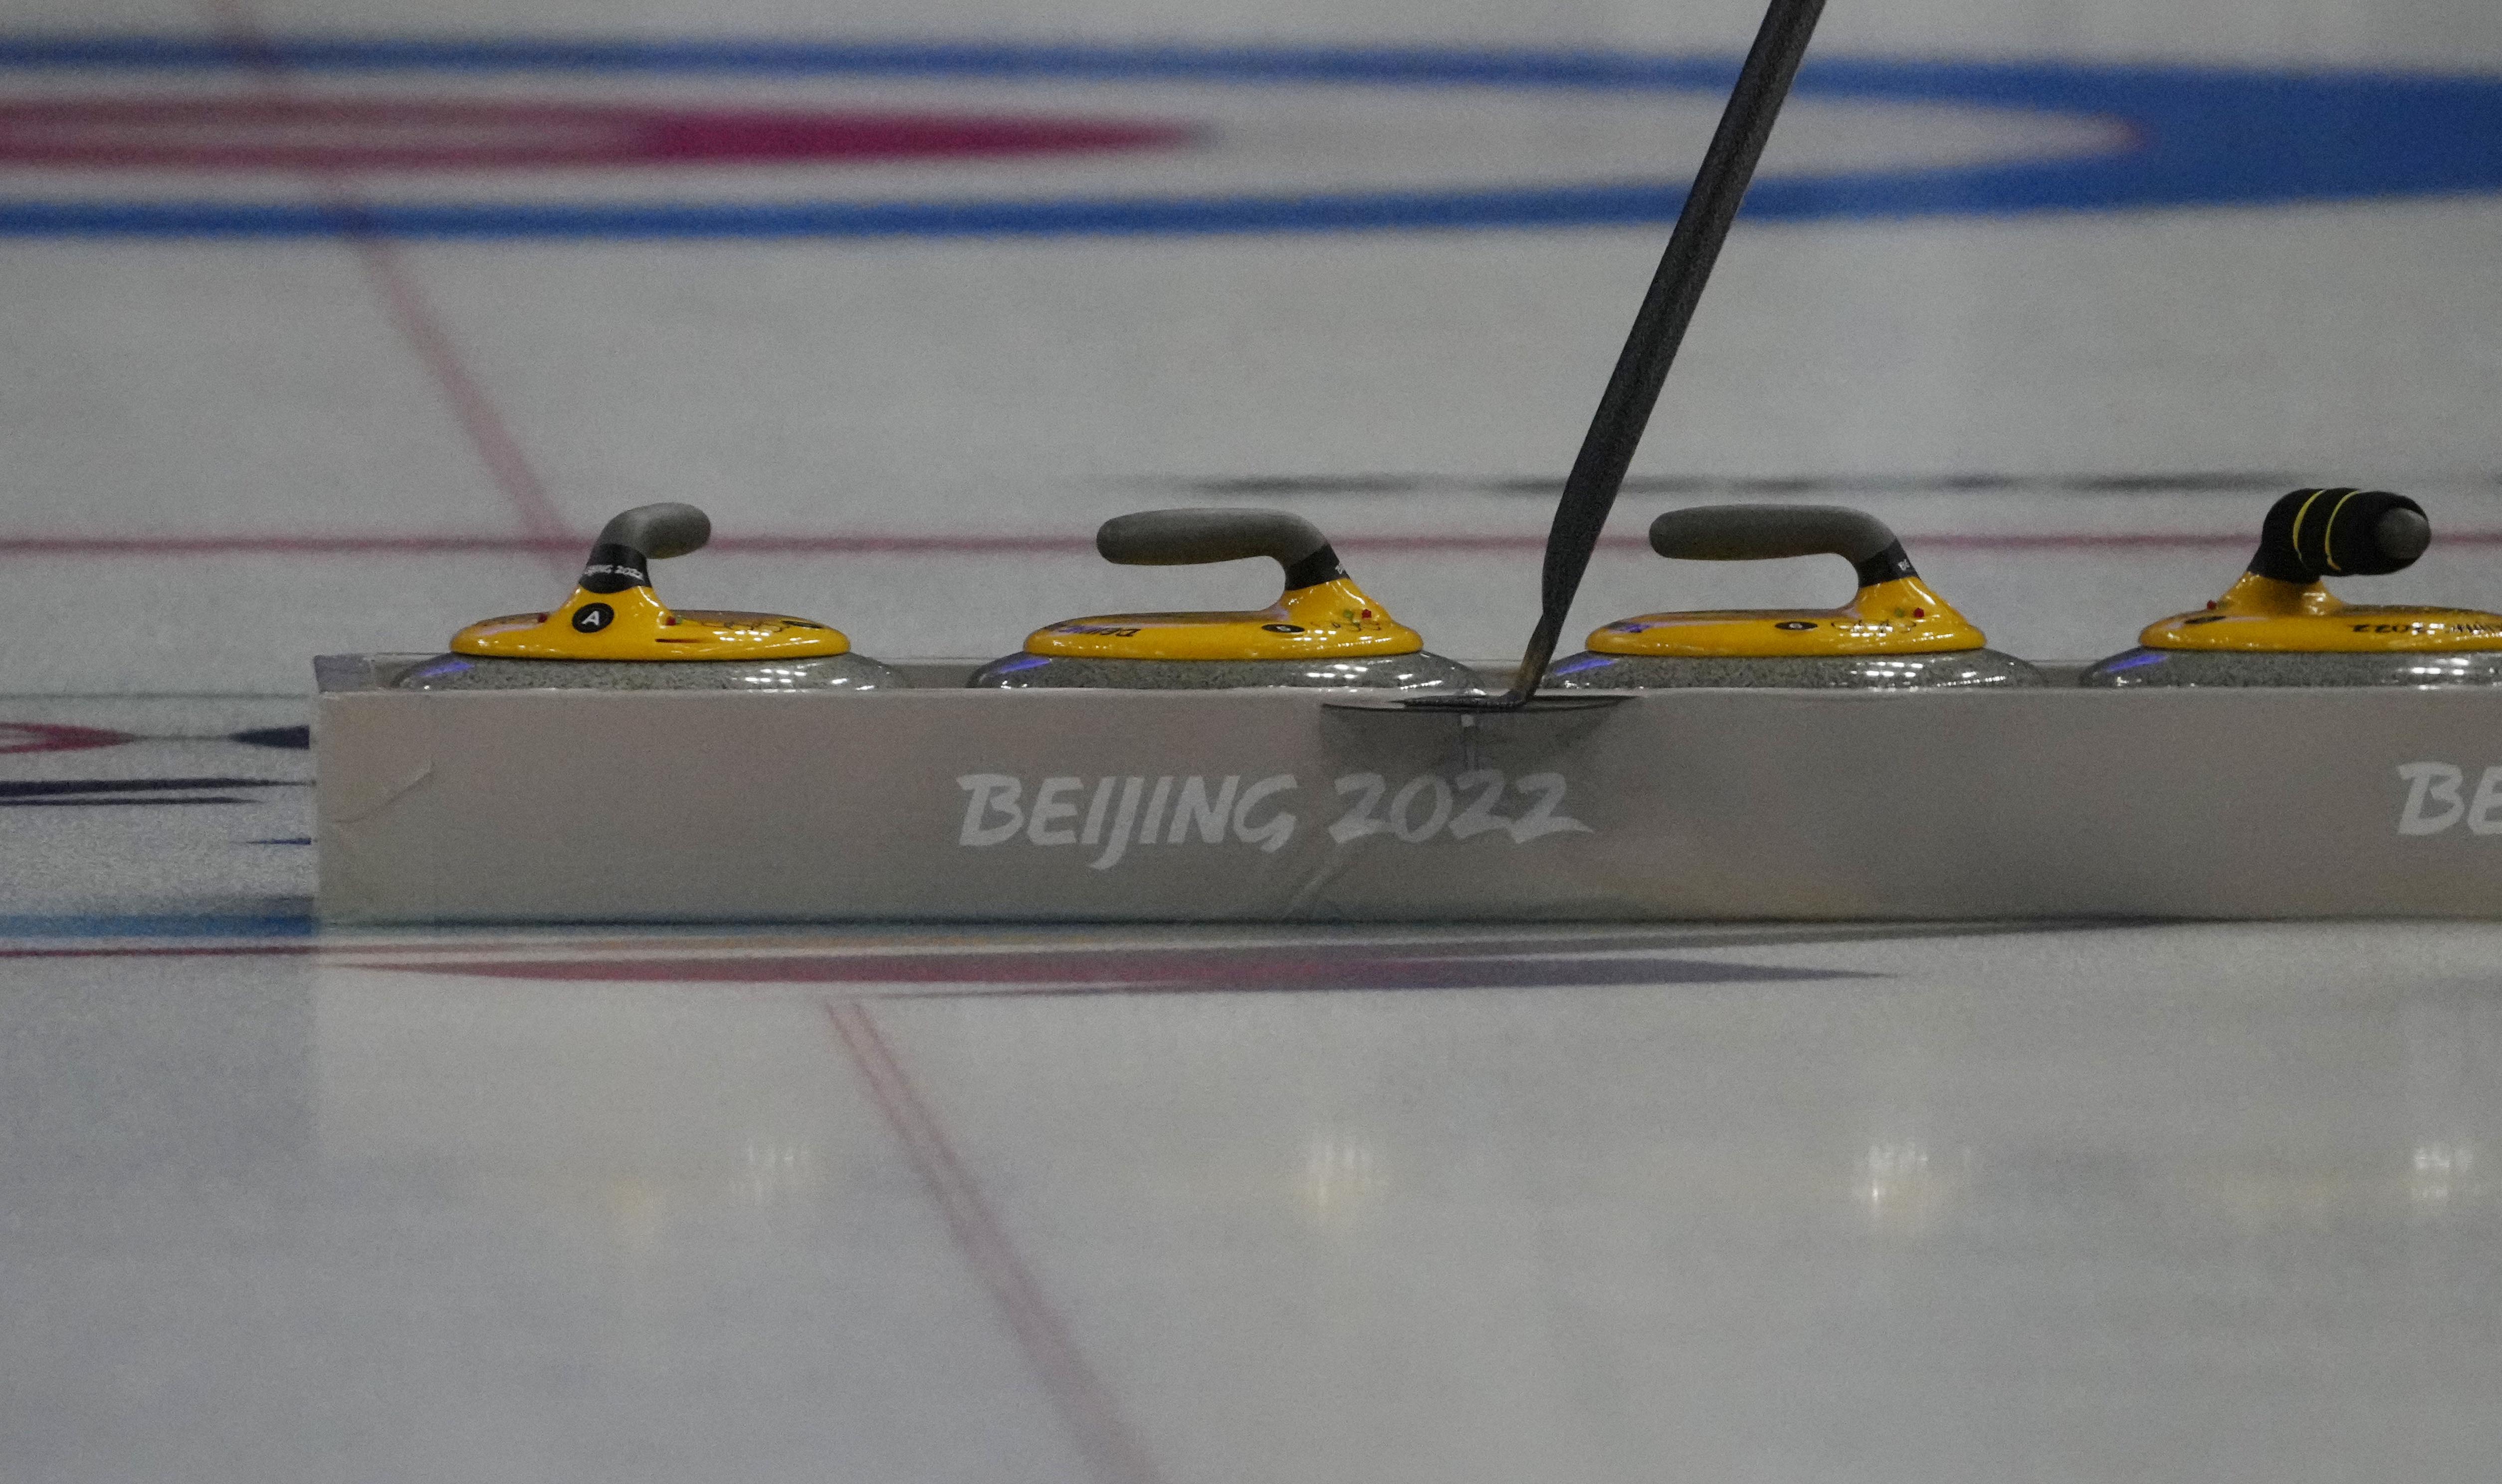 Olympics: Curling-Mixed Doubles Round Robin